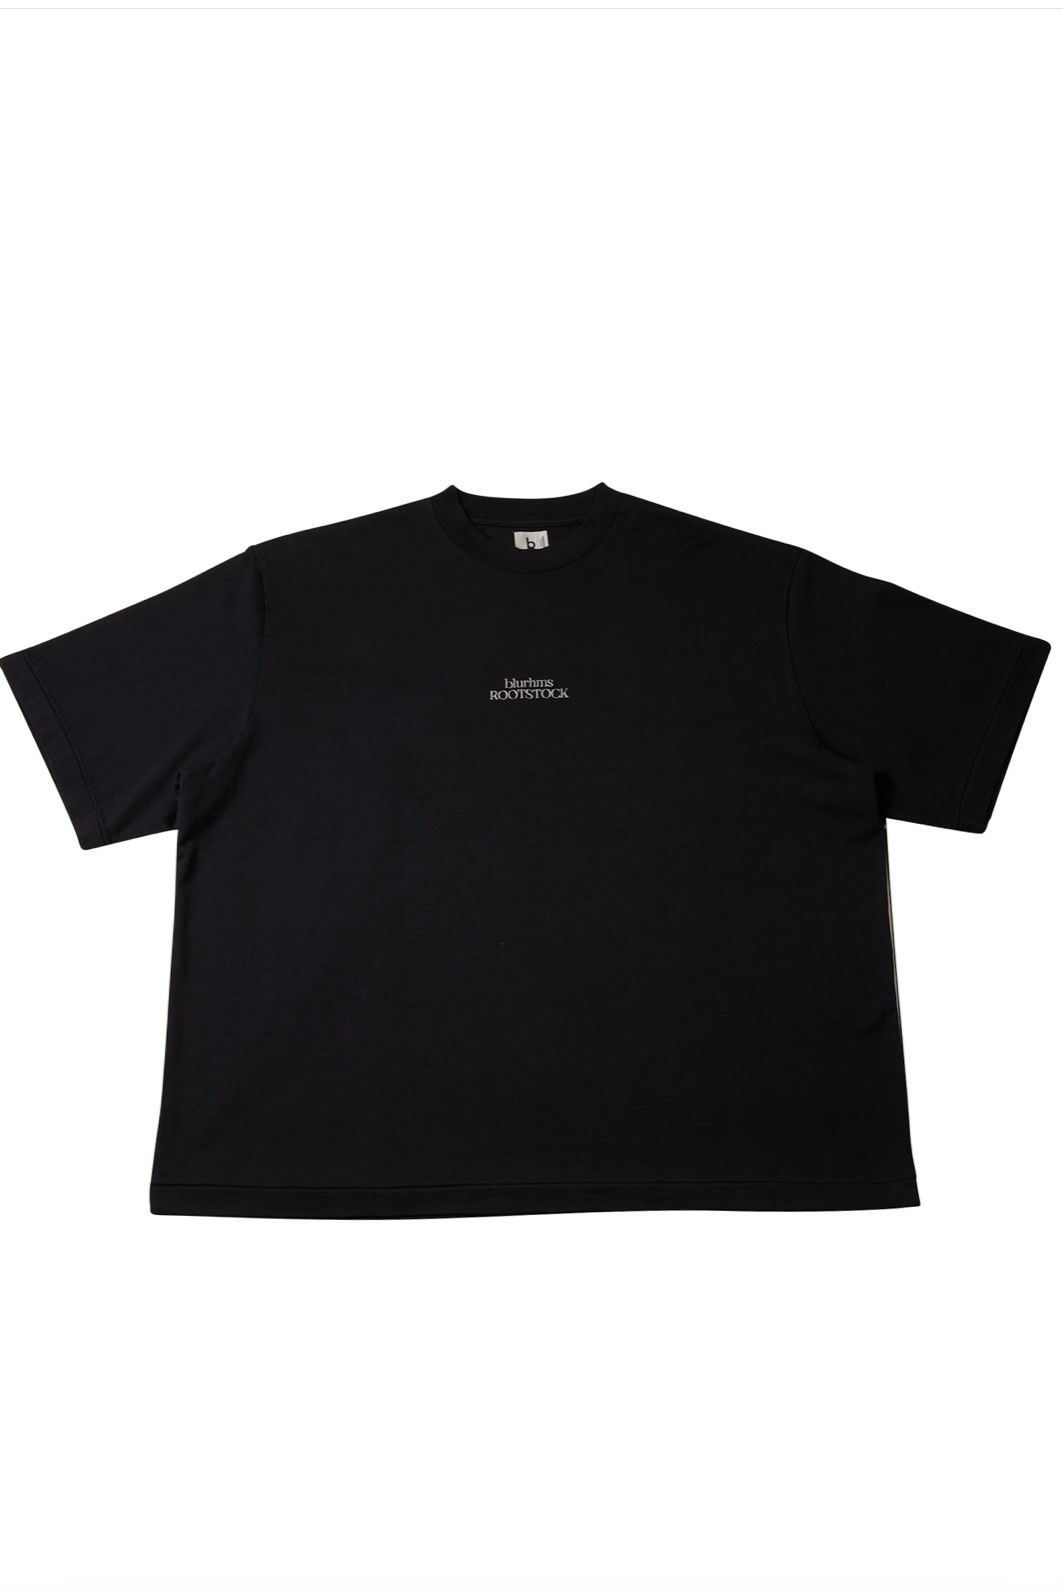 blurhms ROOTSTOCK 23SS ロゴ Tシャツ 3